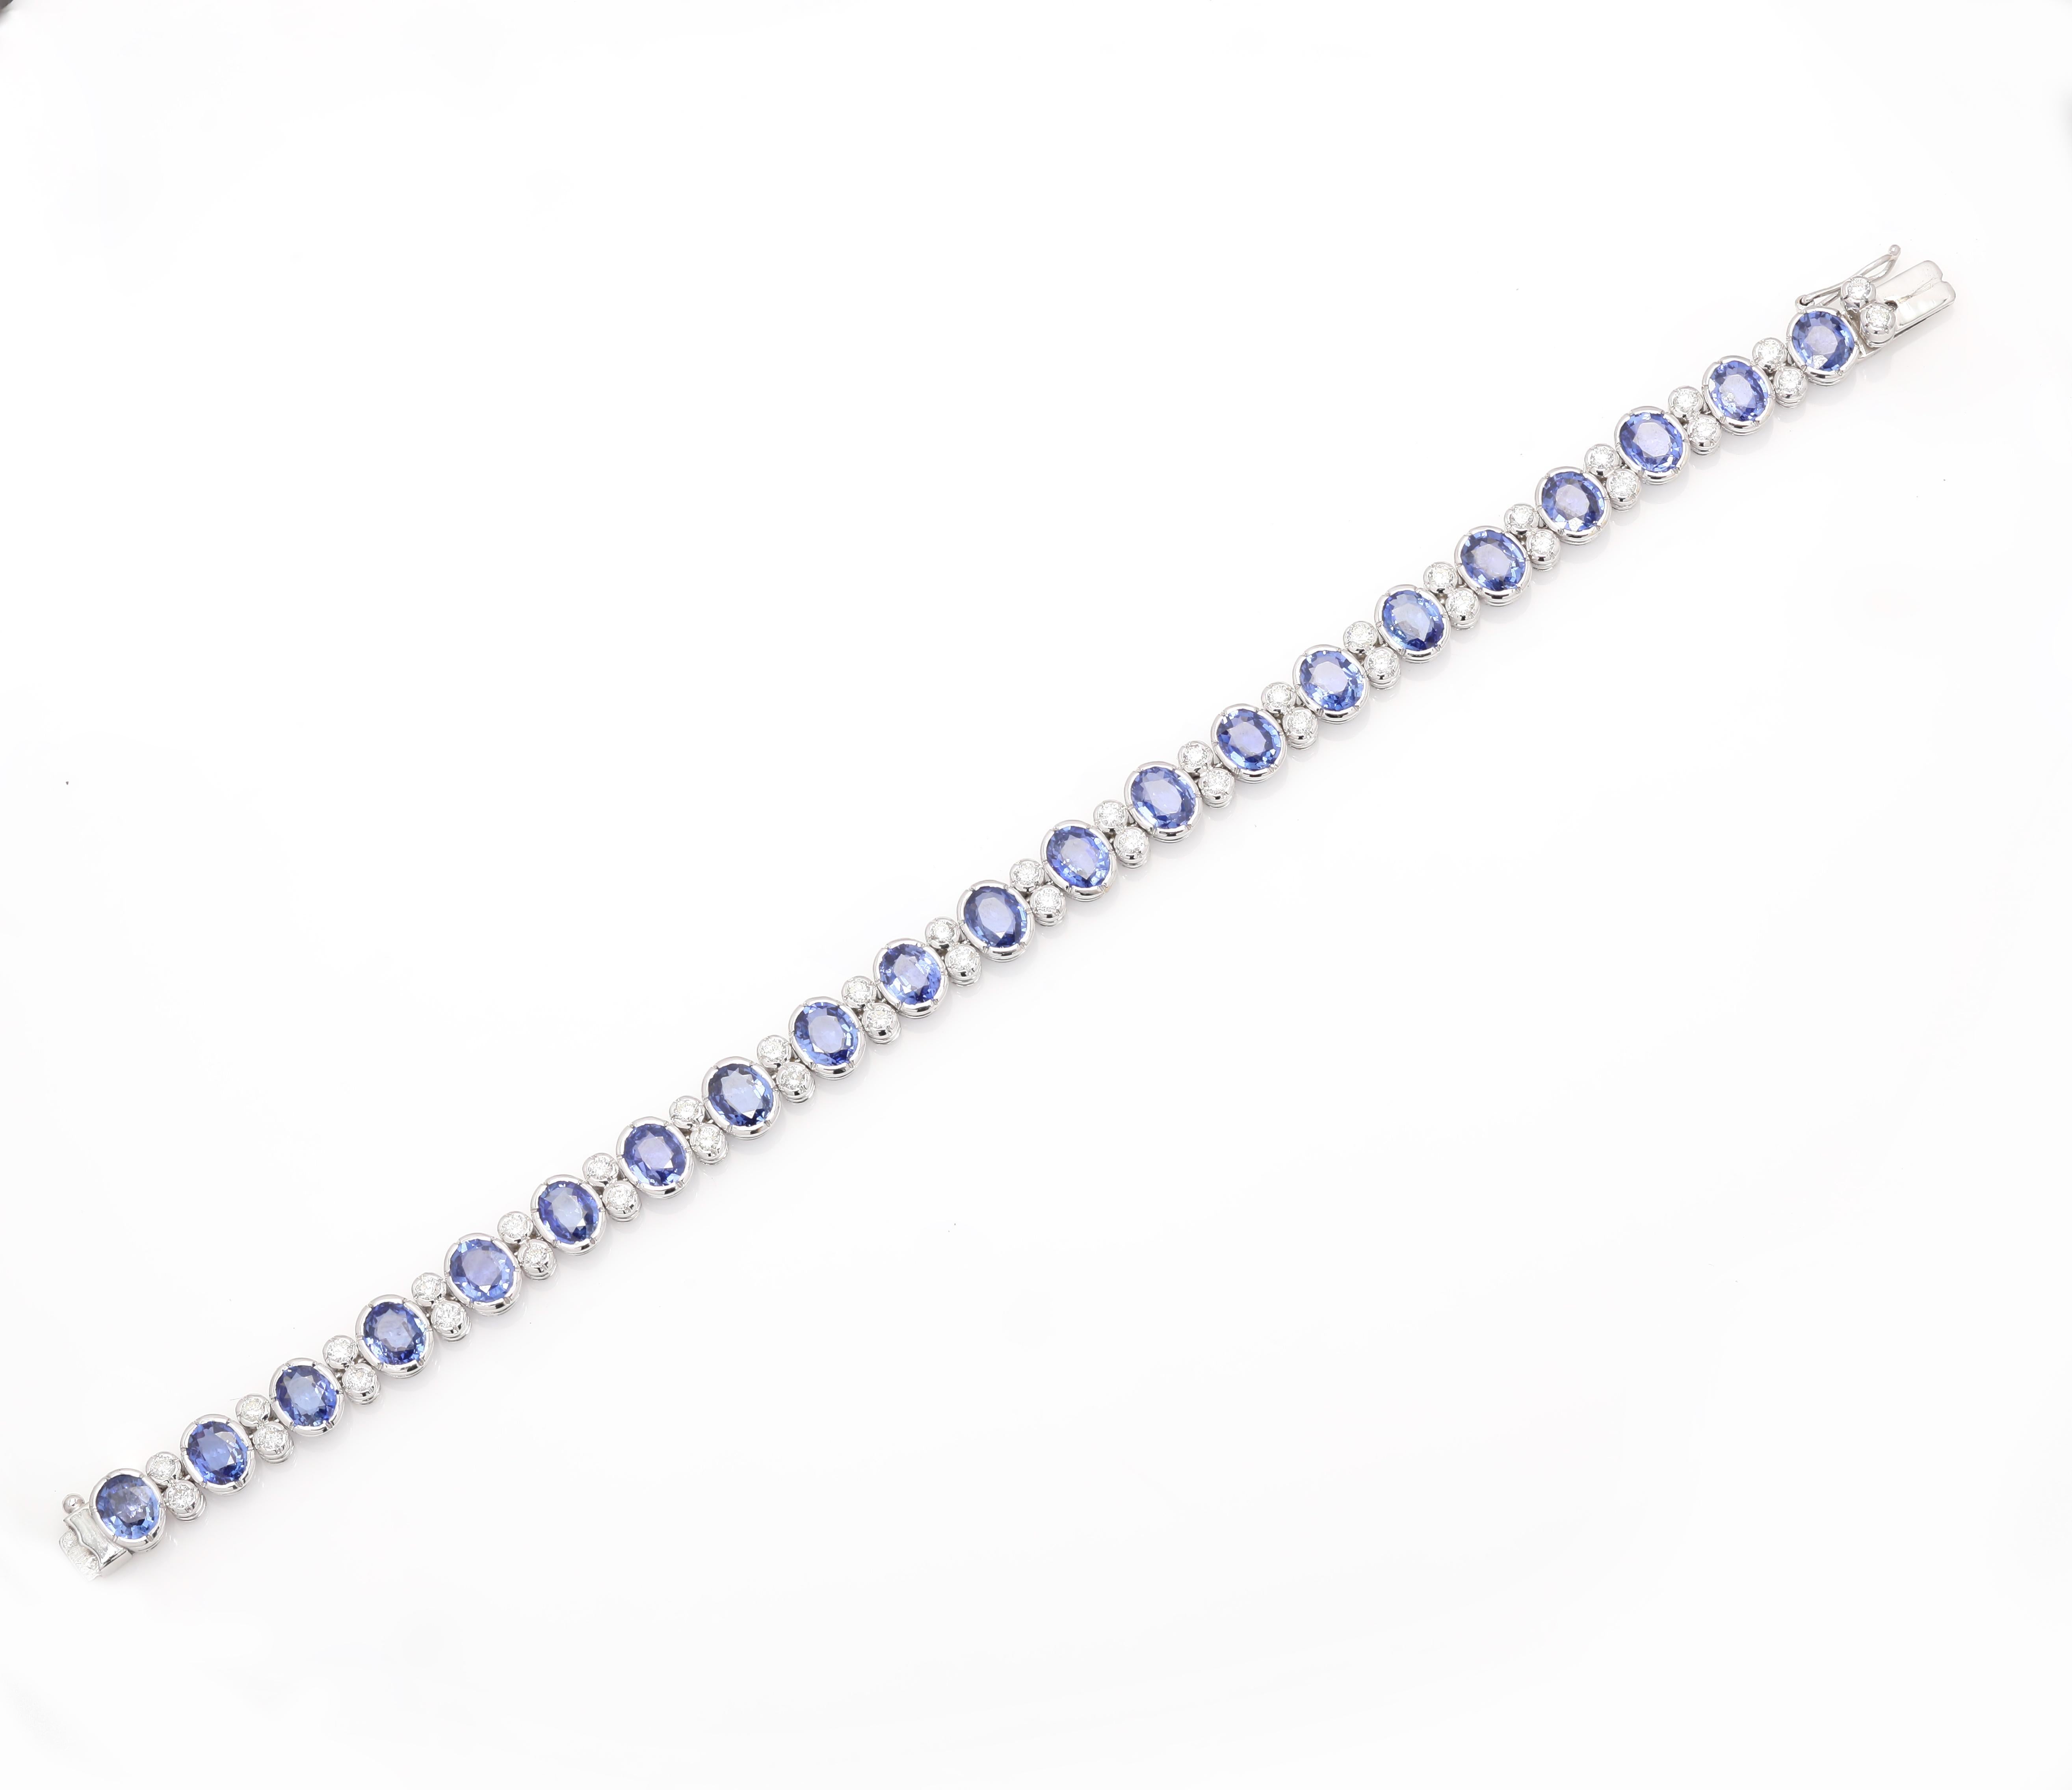 This Diamond Blue Sapphire Wedding Tennis Bracelet in 18K gold showcases 21 endlessly sparkling natural sapphire , weighing 15.45 carat. It measures 7.25 inches long in length. 
Sapphire stimulates concentration and reduces stress. 
Designed with